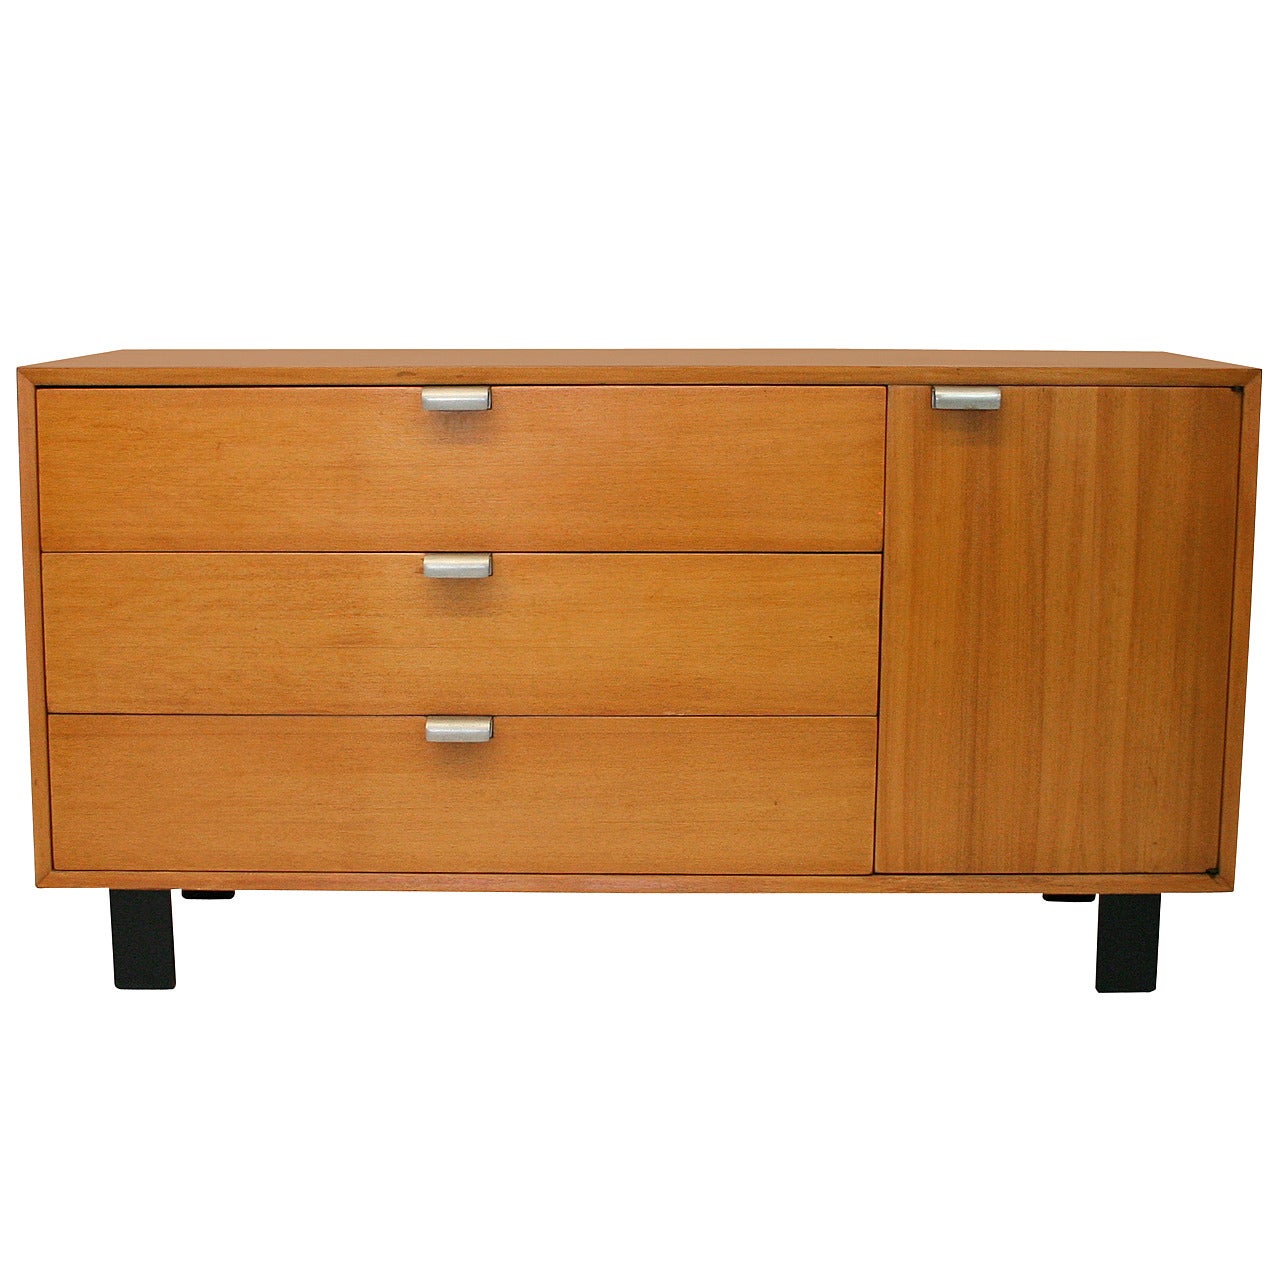 George Nelson Cabinet for Herman Miller